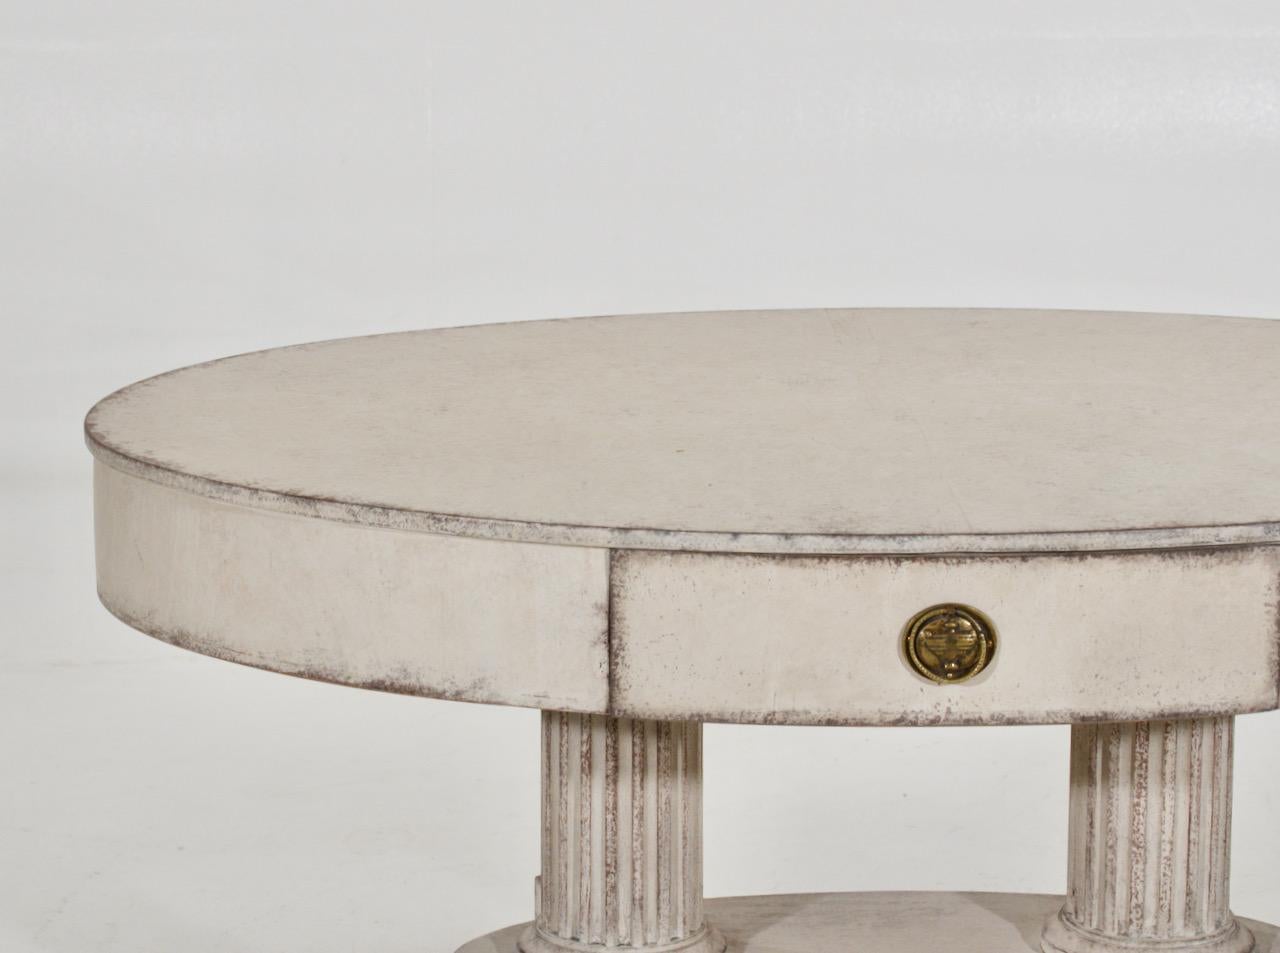 Rare European oval center table with bronze feets and drawer, circa 1820.